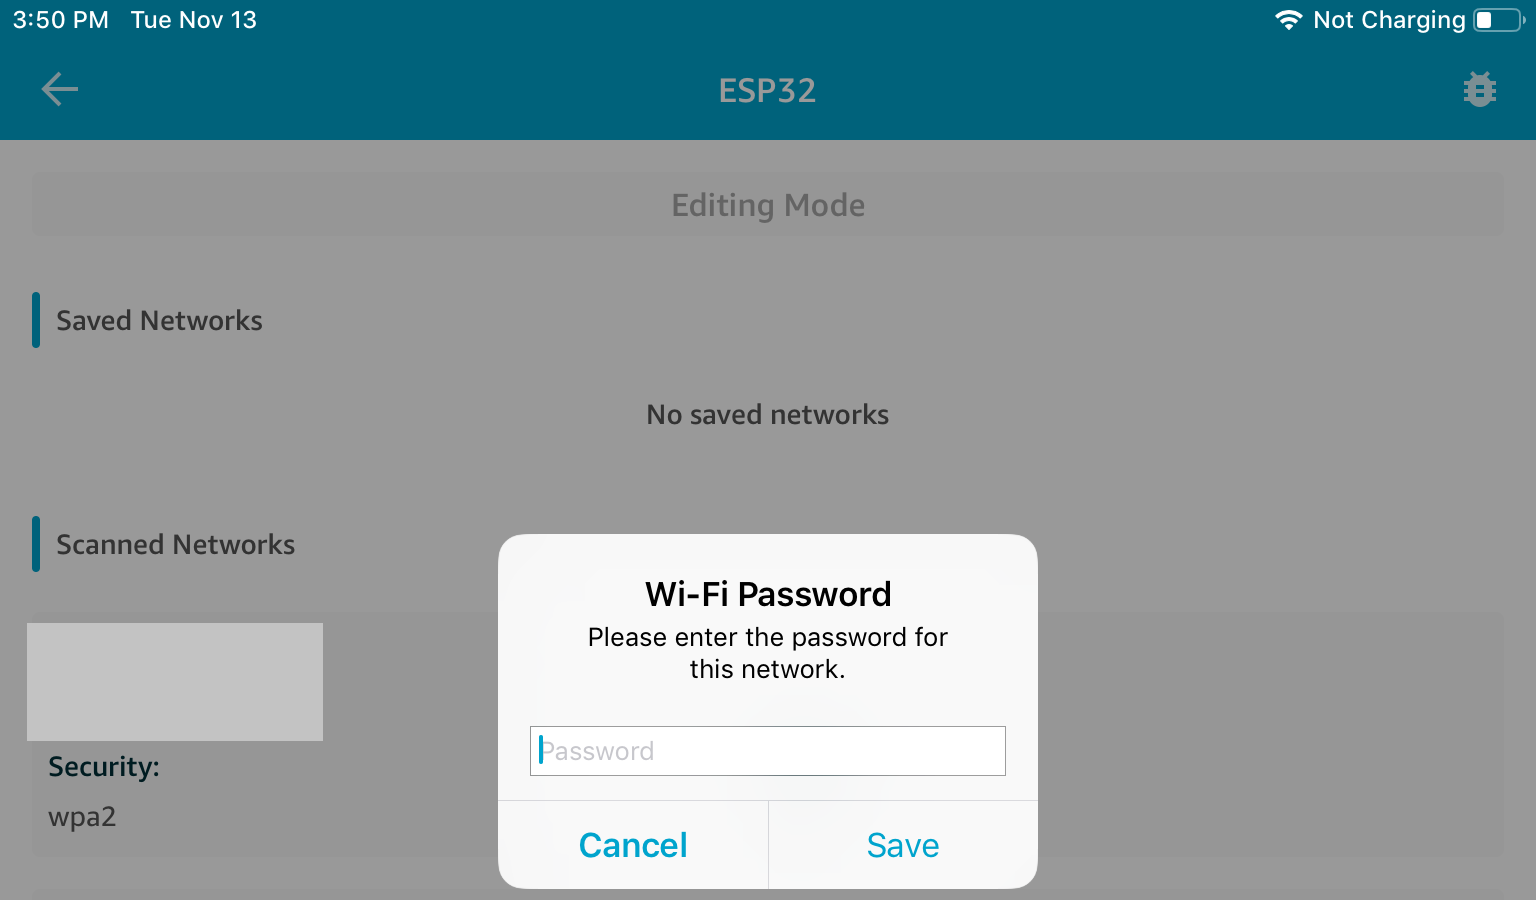 Wi-Fi network password entry dialog box with empty password field, Cancel and Save buttons.